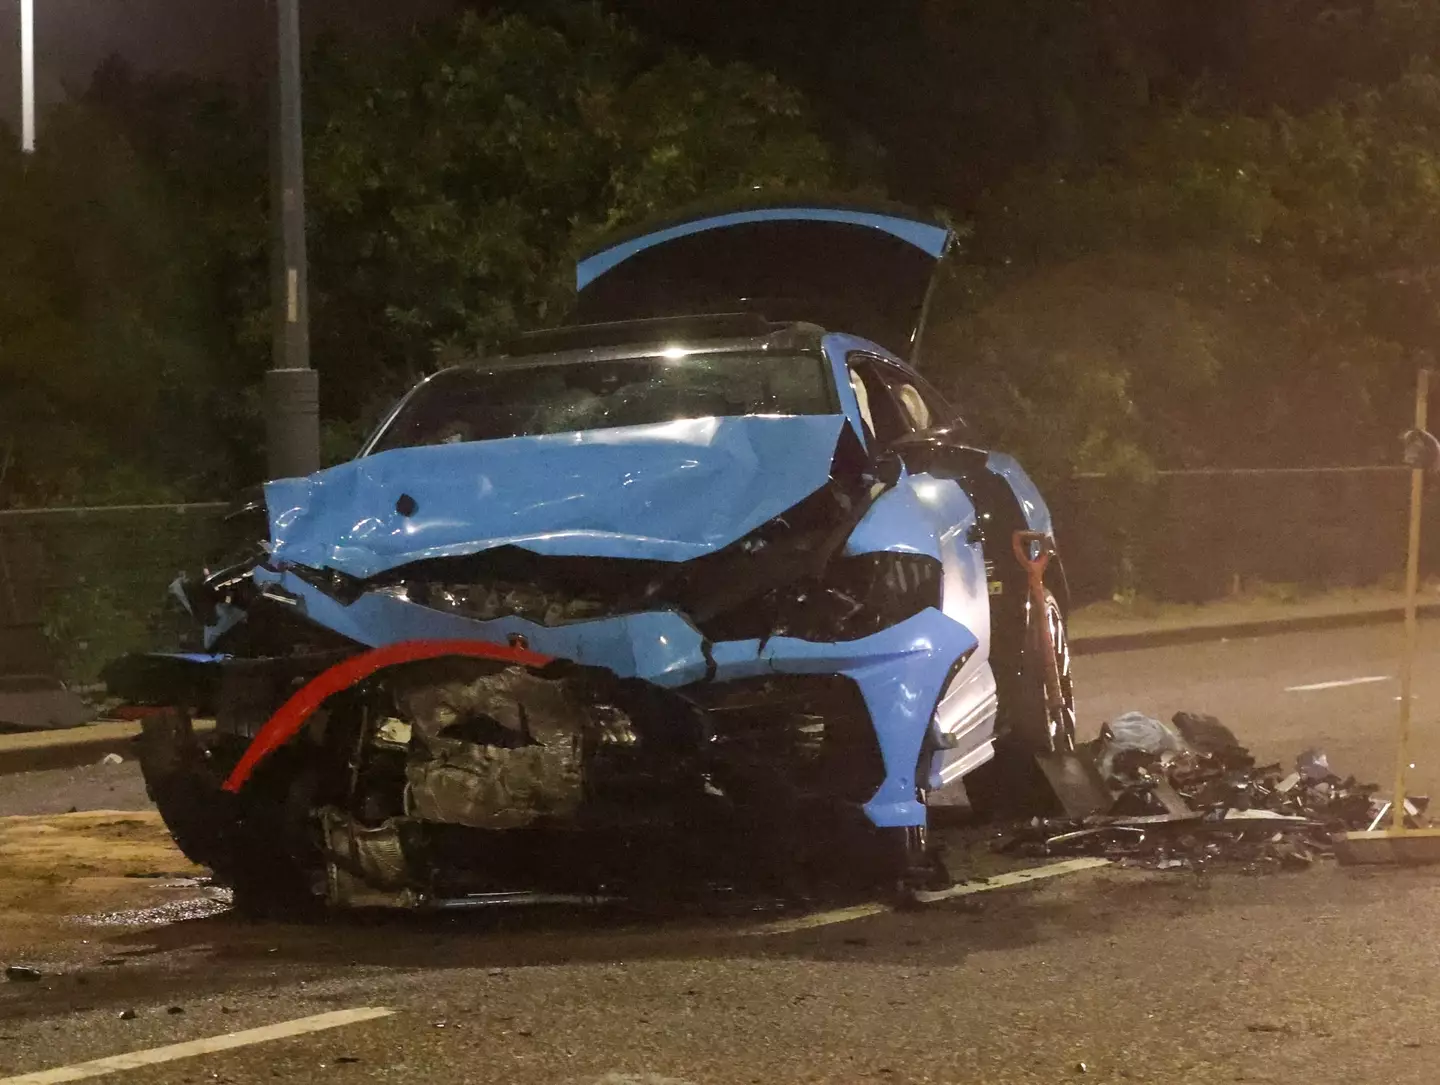 Six people were involved in the crash and are said not to be in a life threatening condition.